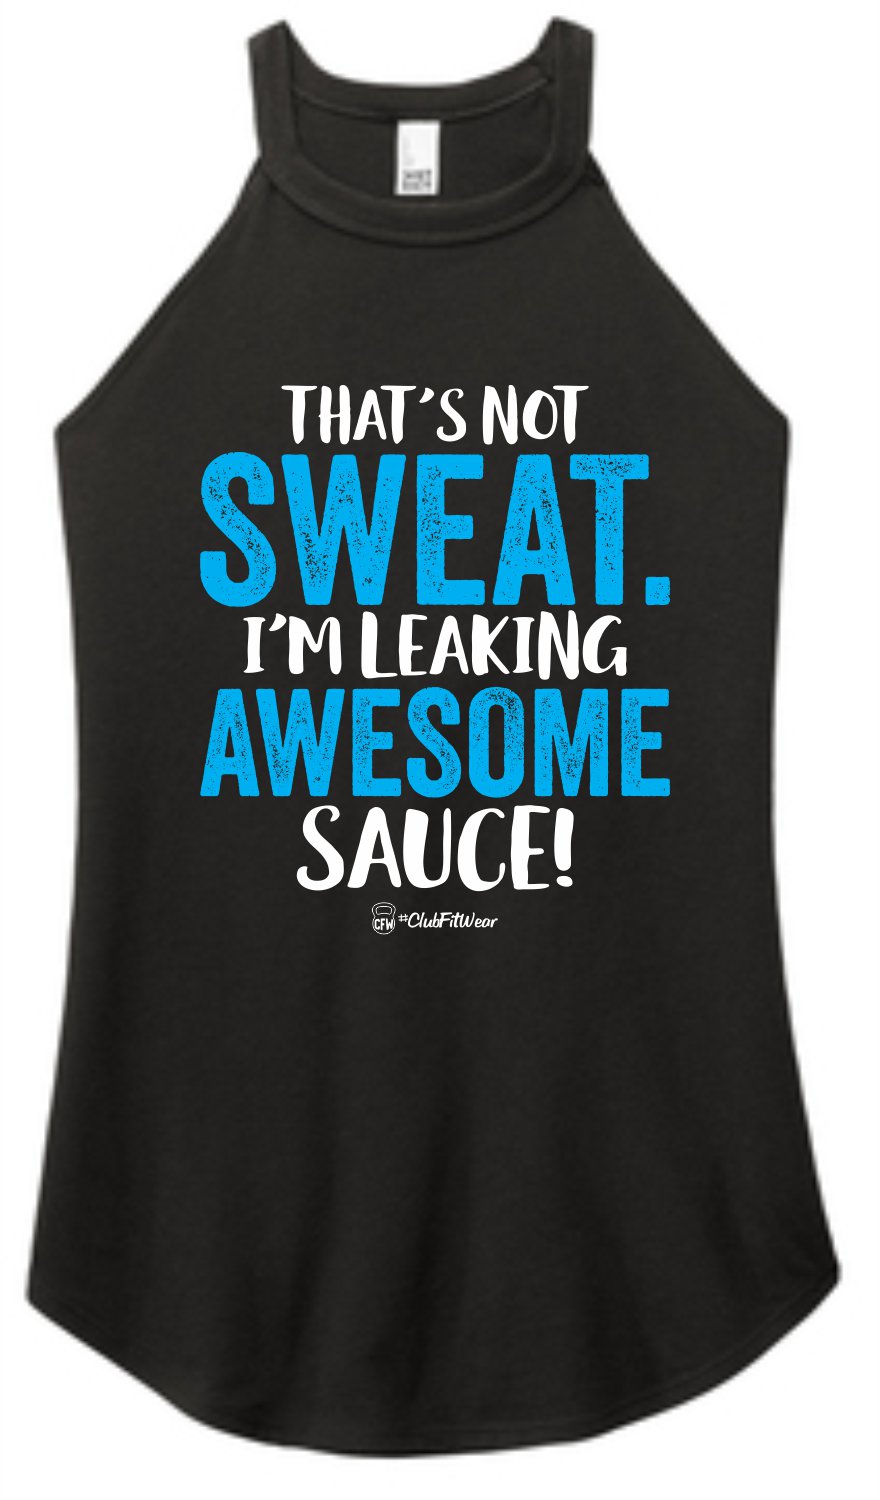 That's not Sweat. I'm Leaking Awesome Sauce? - High Neck Rocker Tank